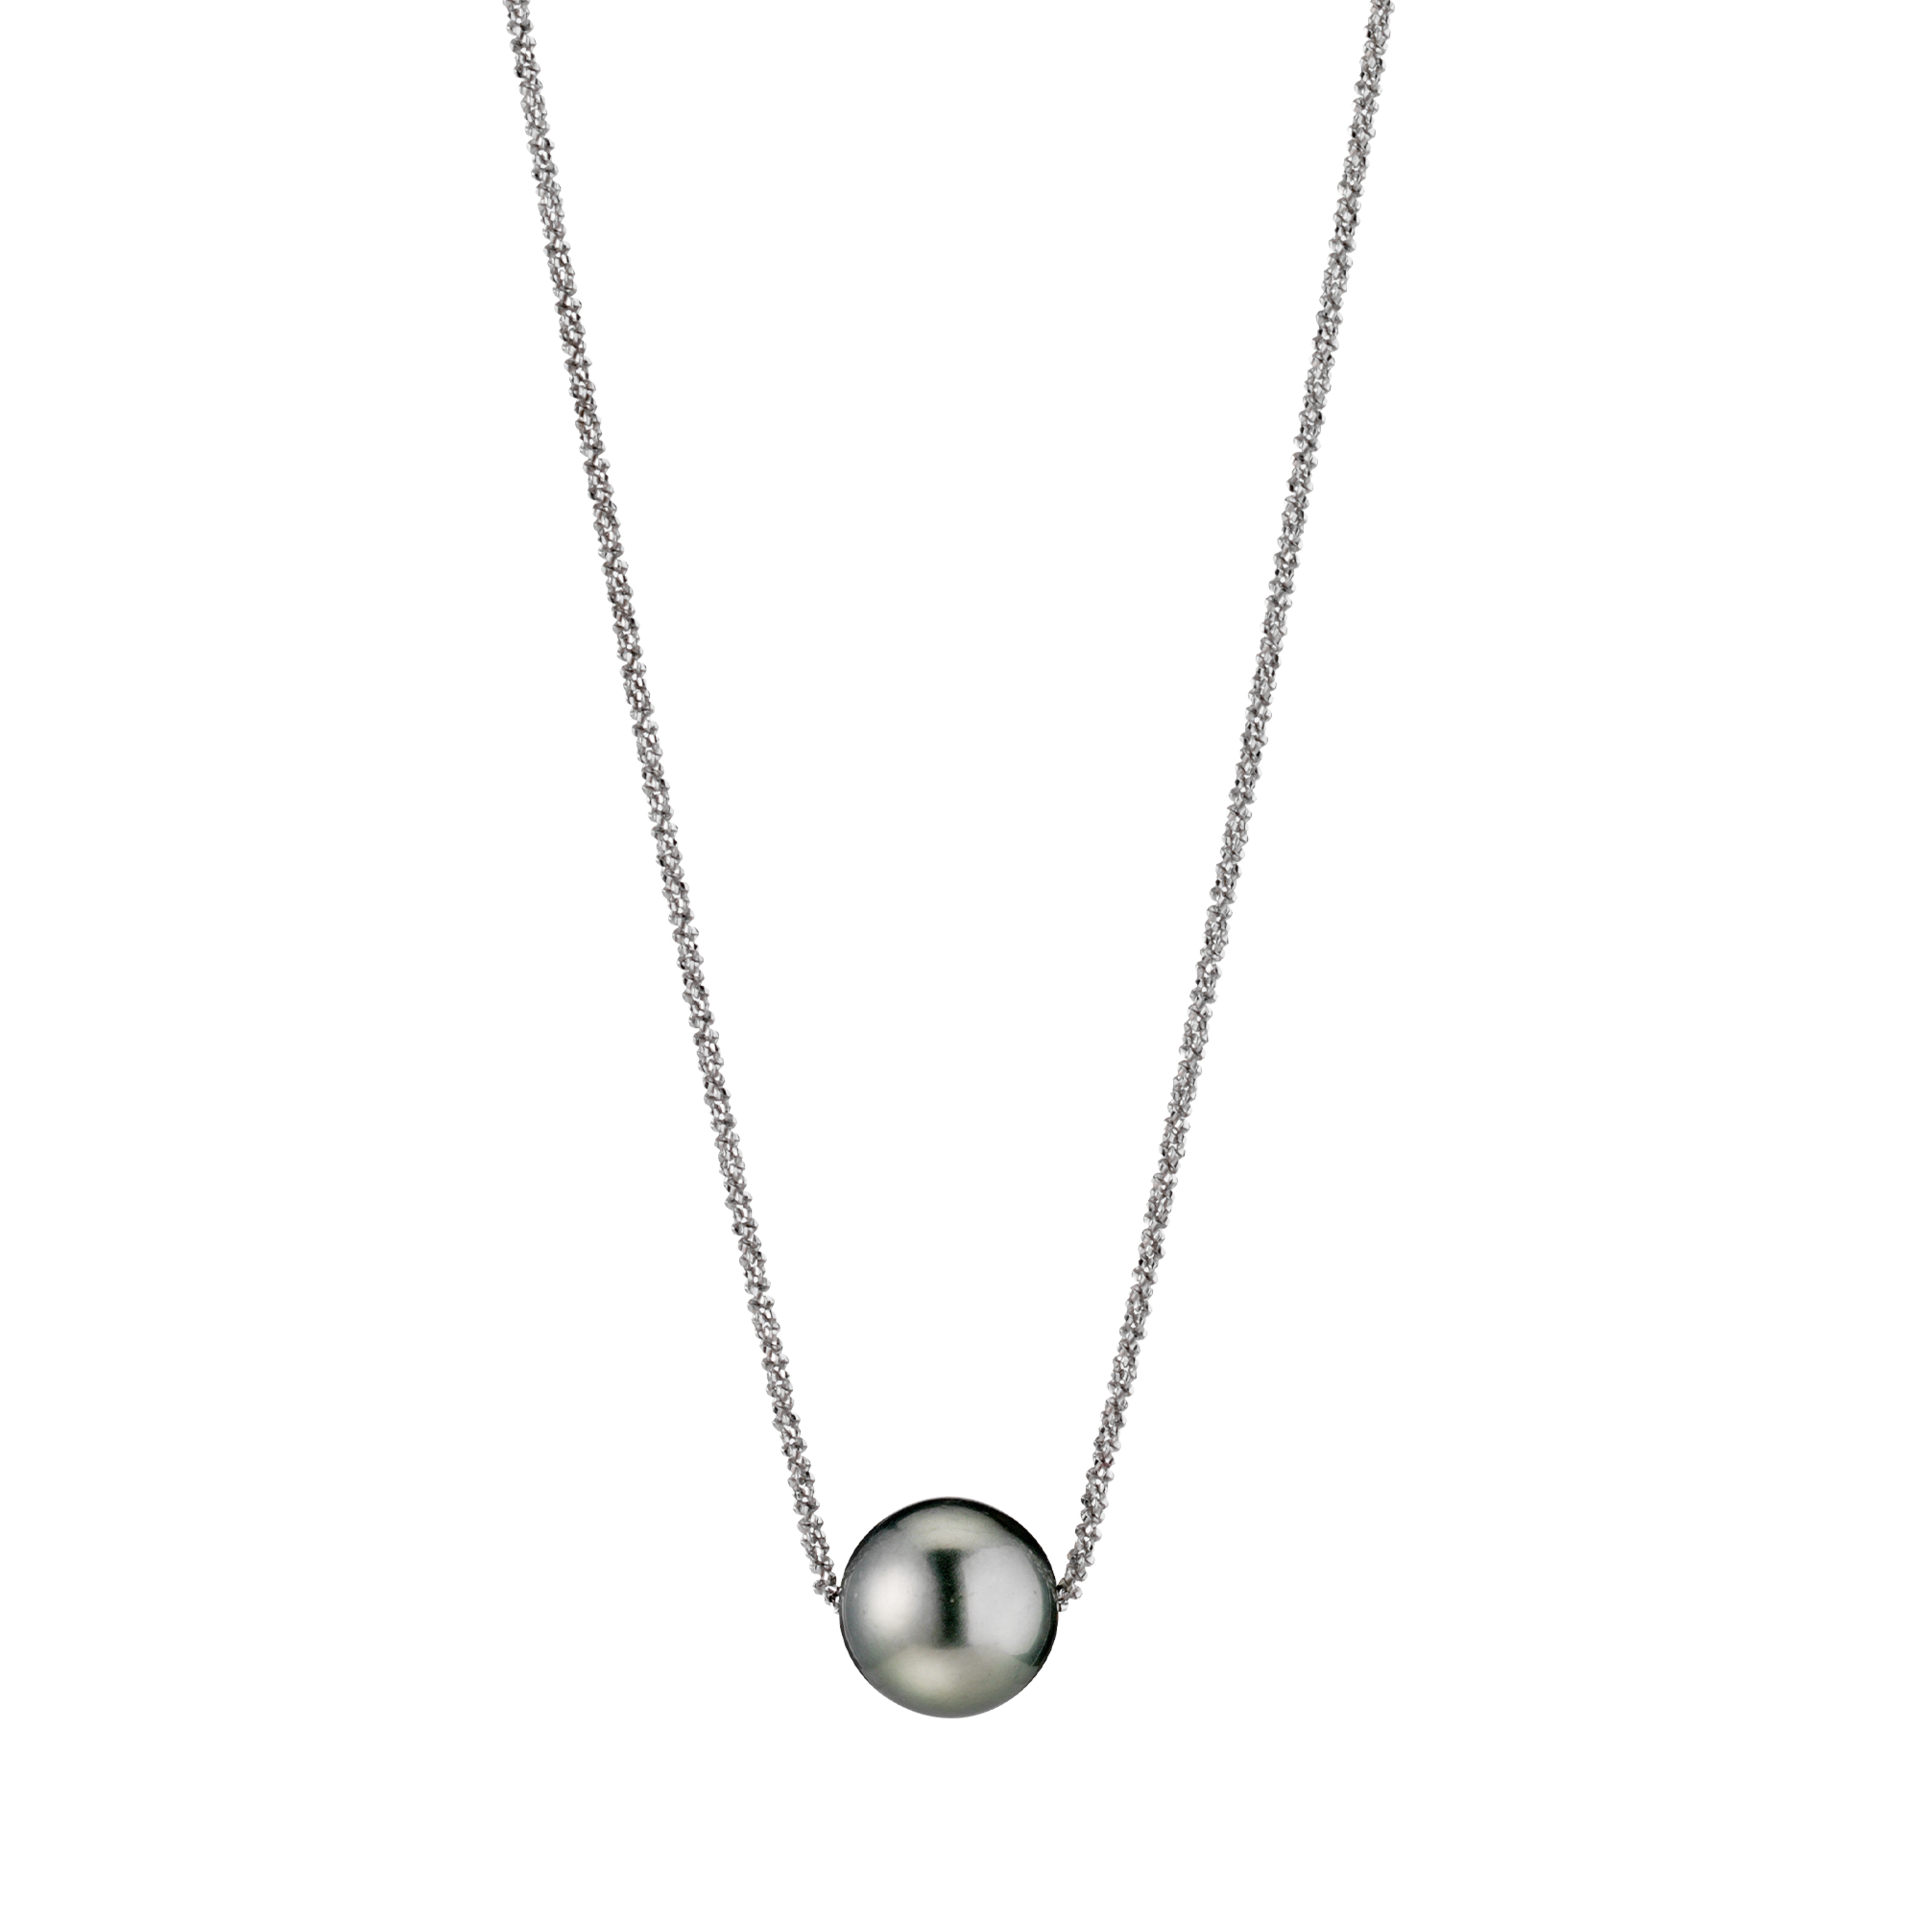 Gellner Young Basics necklace with pendant